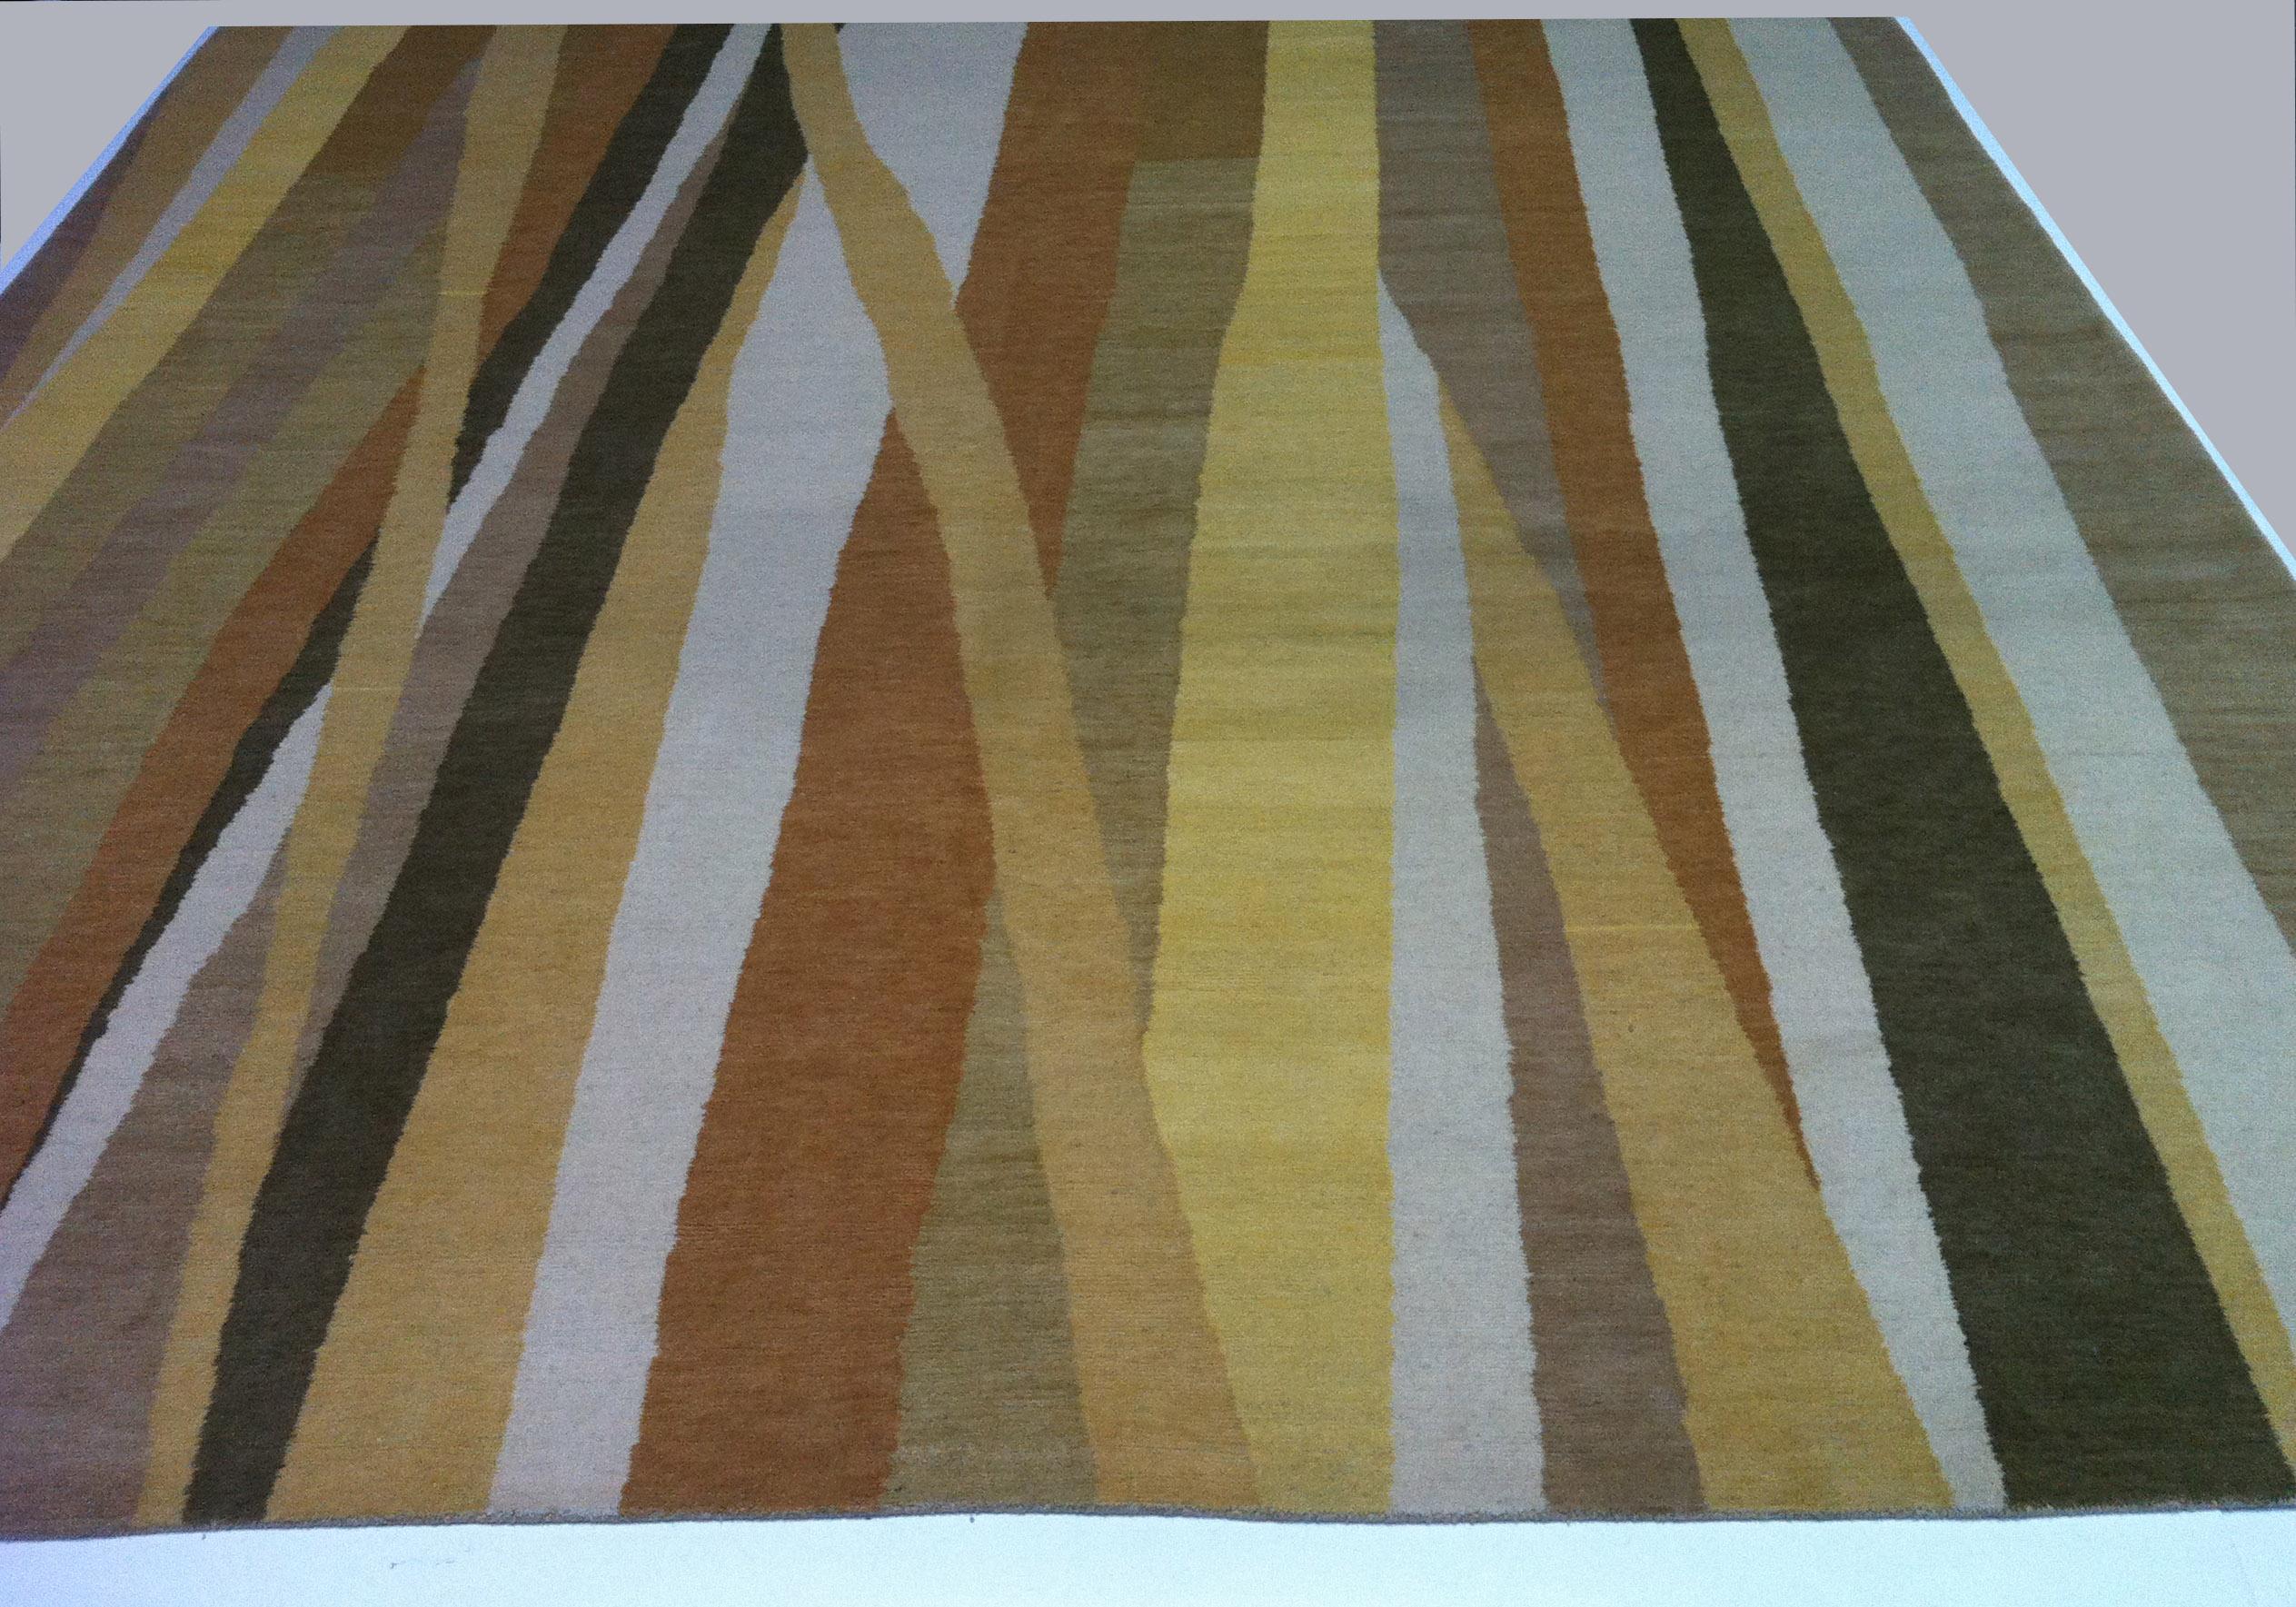 Warm earthy colors and a modern take on stripes come together to create a rug that would be equally at home hanging on the wall as a piece of modern art. A great piece to complement a palette of natural finishes and textures. Tones include gold,